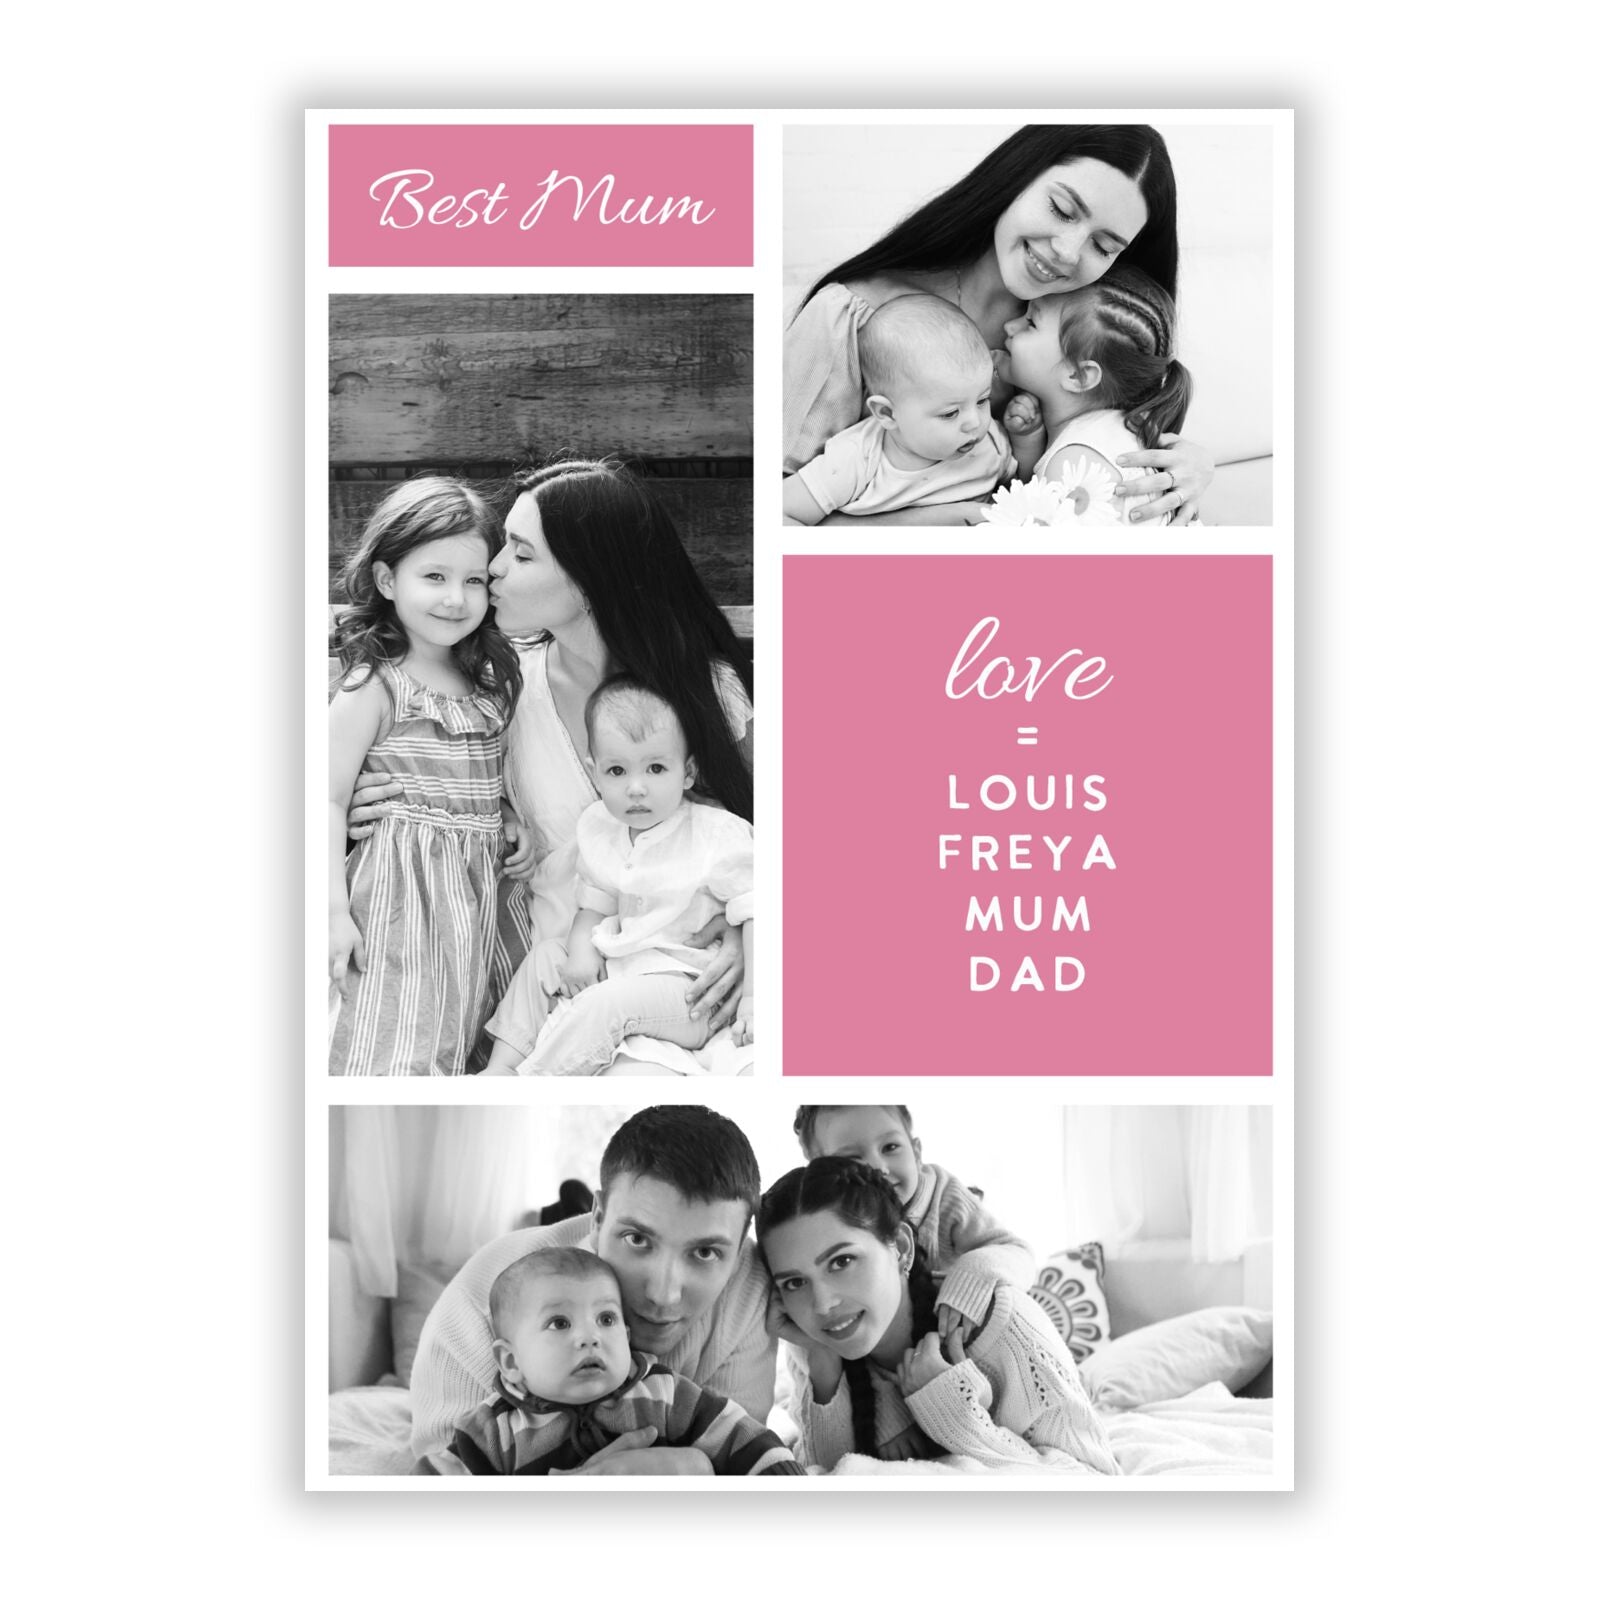 Best Mum Photo Collage Personalised A5 Flat Greetings Card